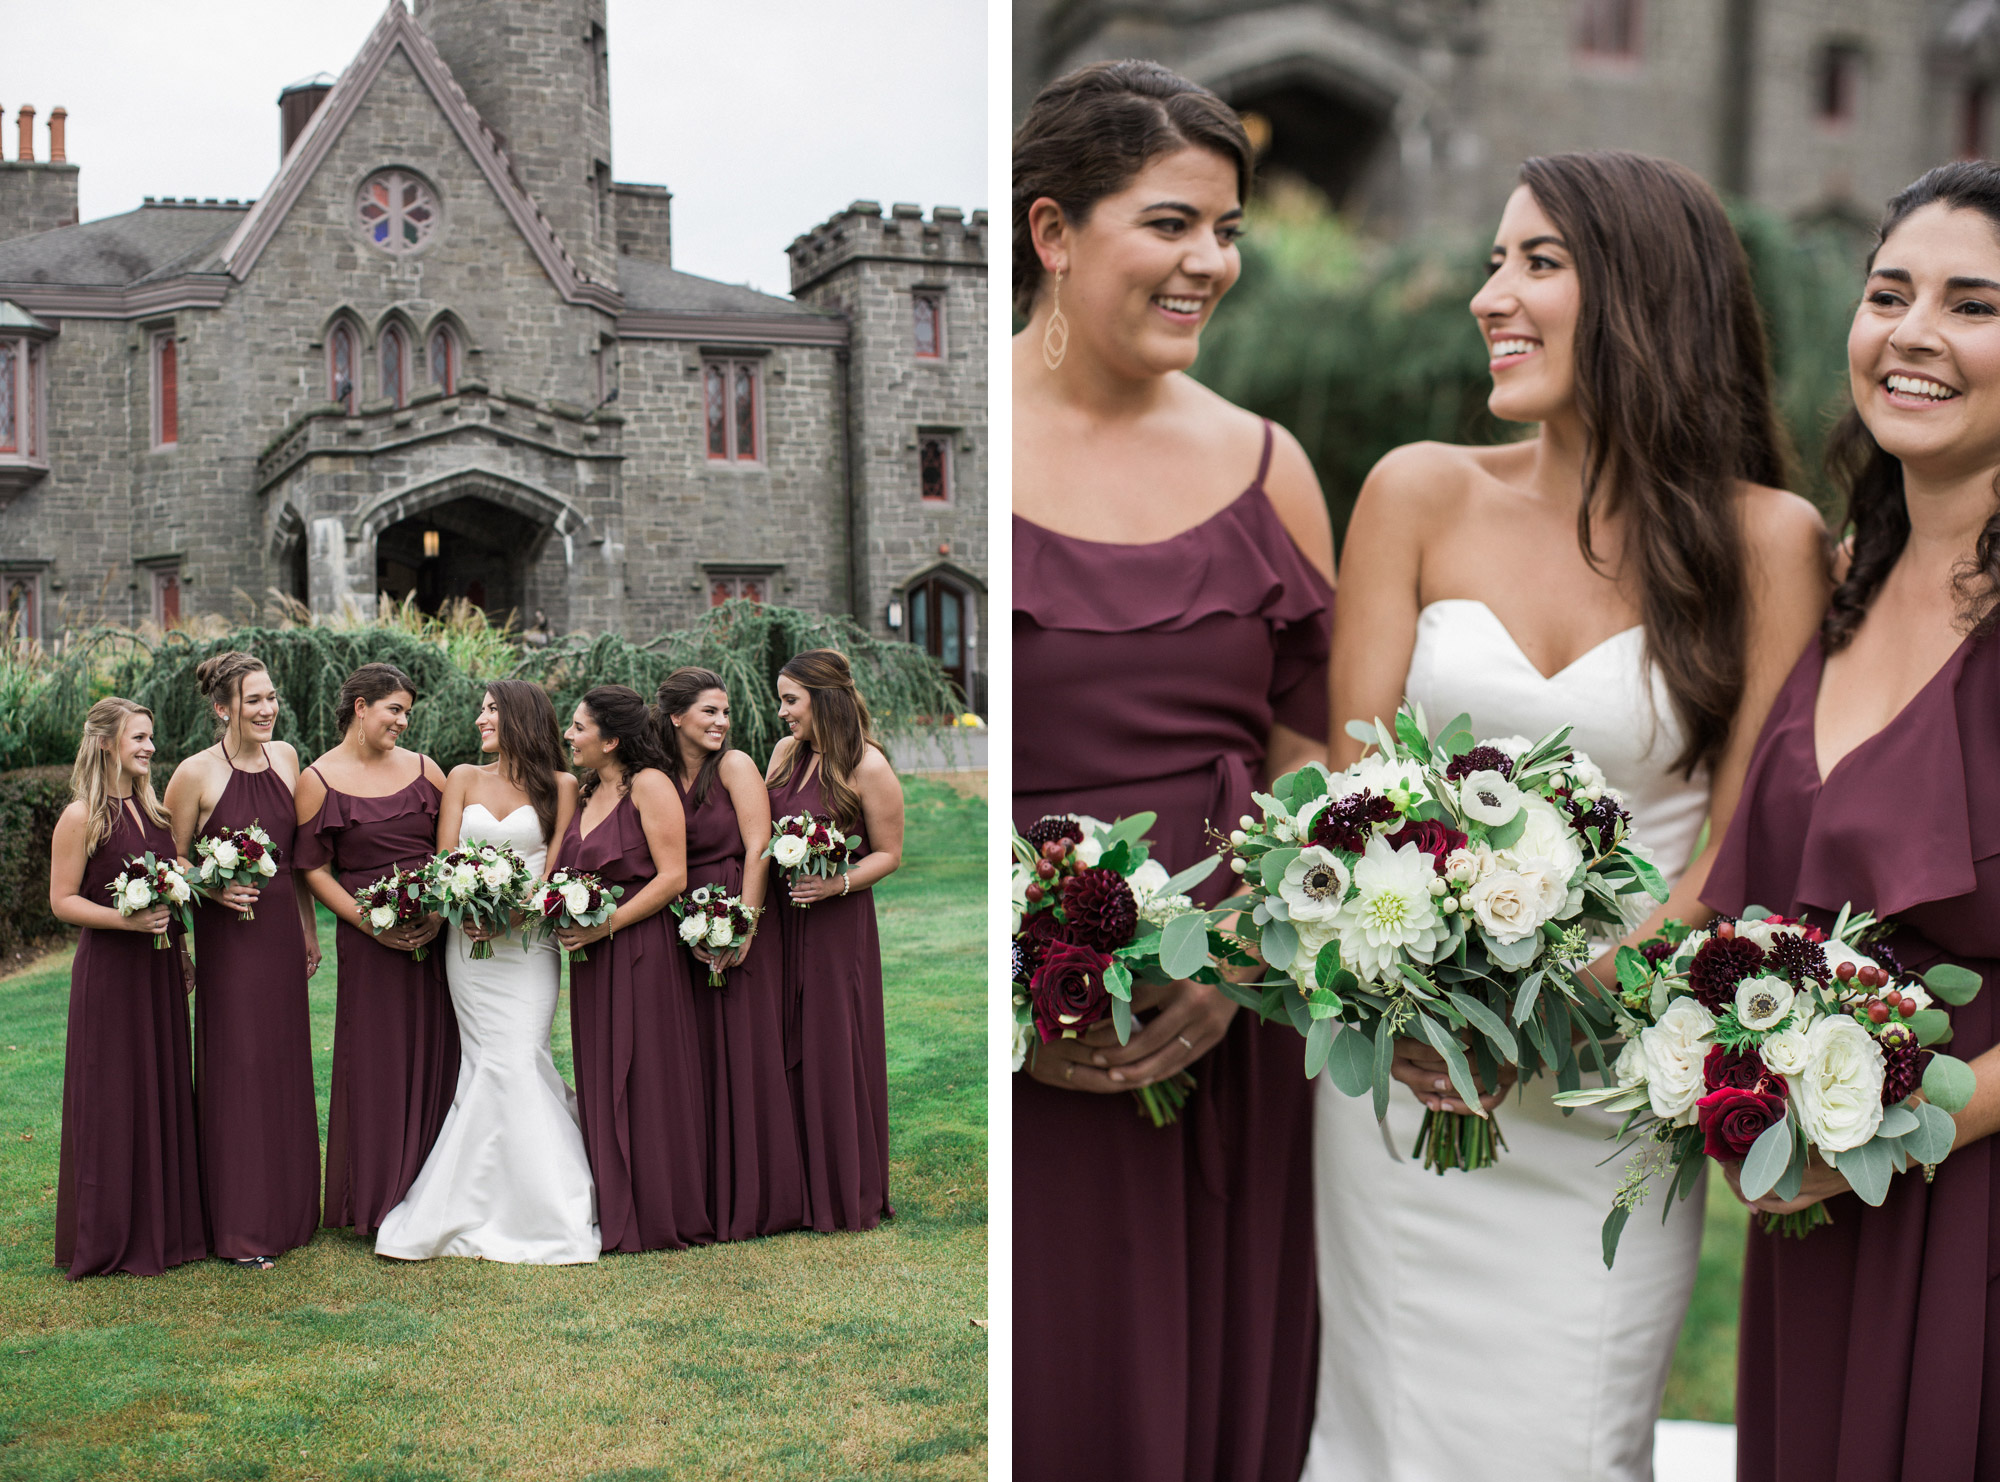 Wedding at Whitby Castle.  Photos by Kelly Kollar Photography.